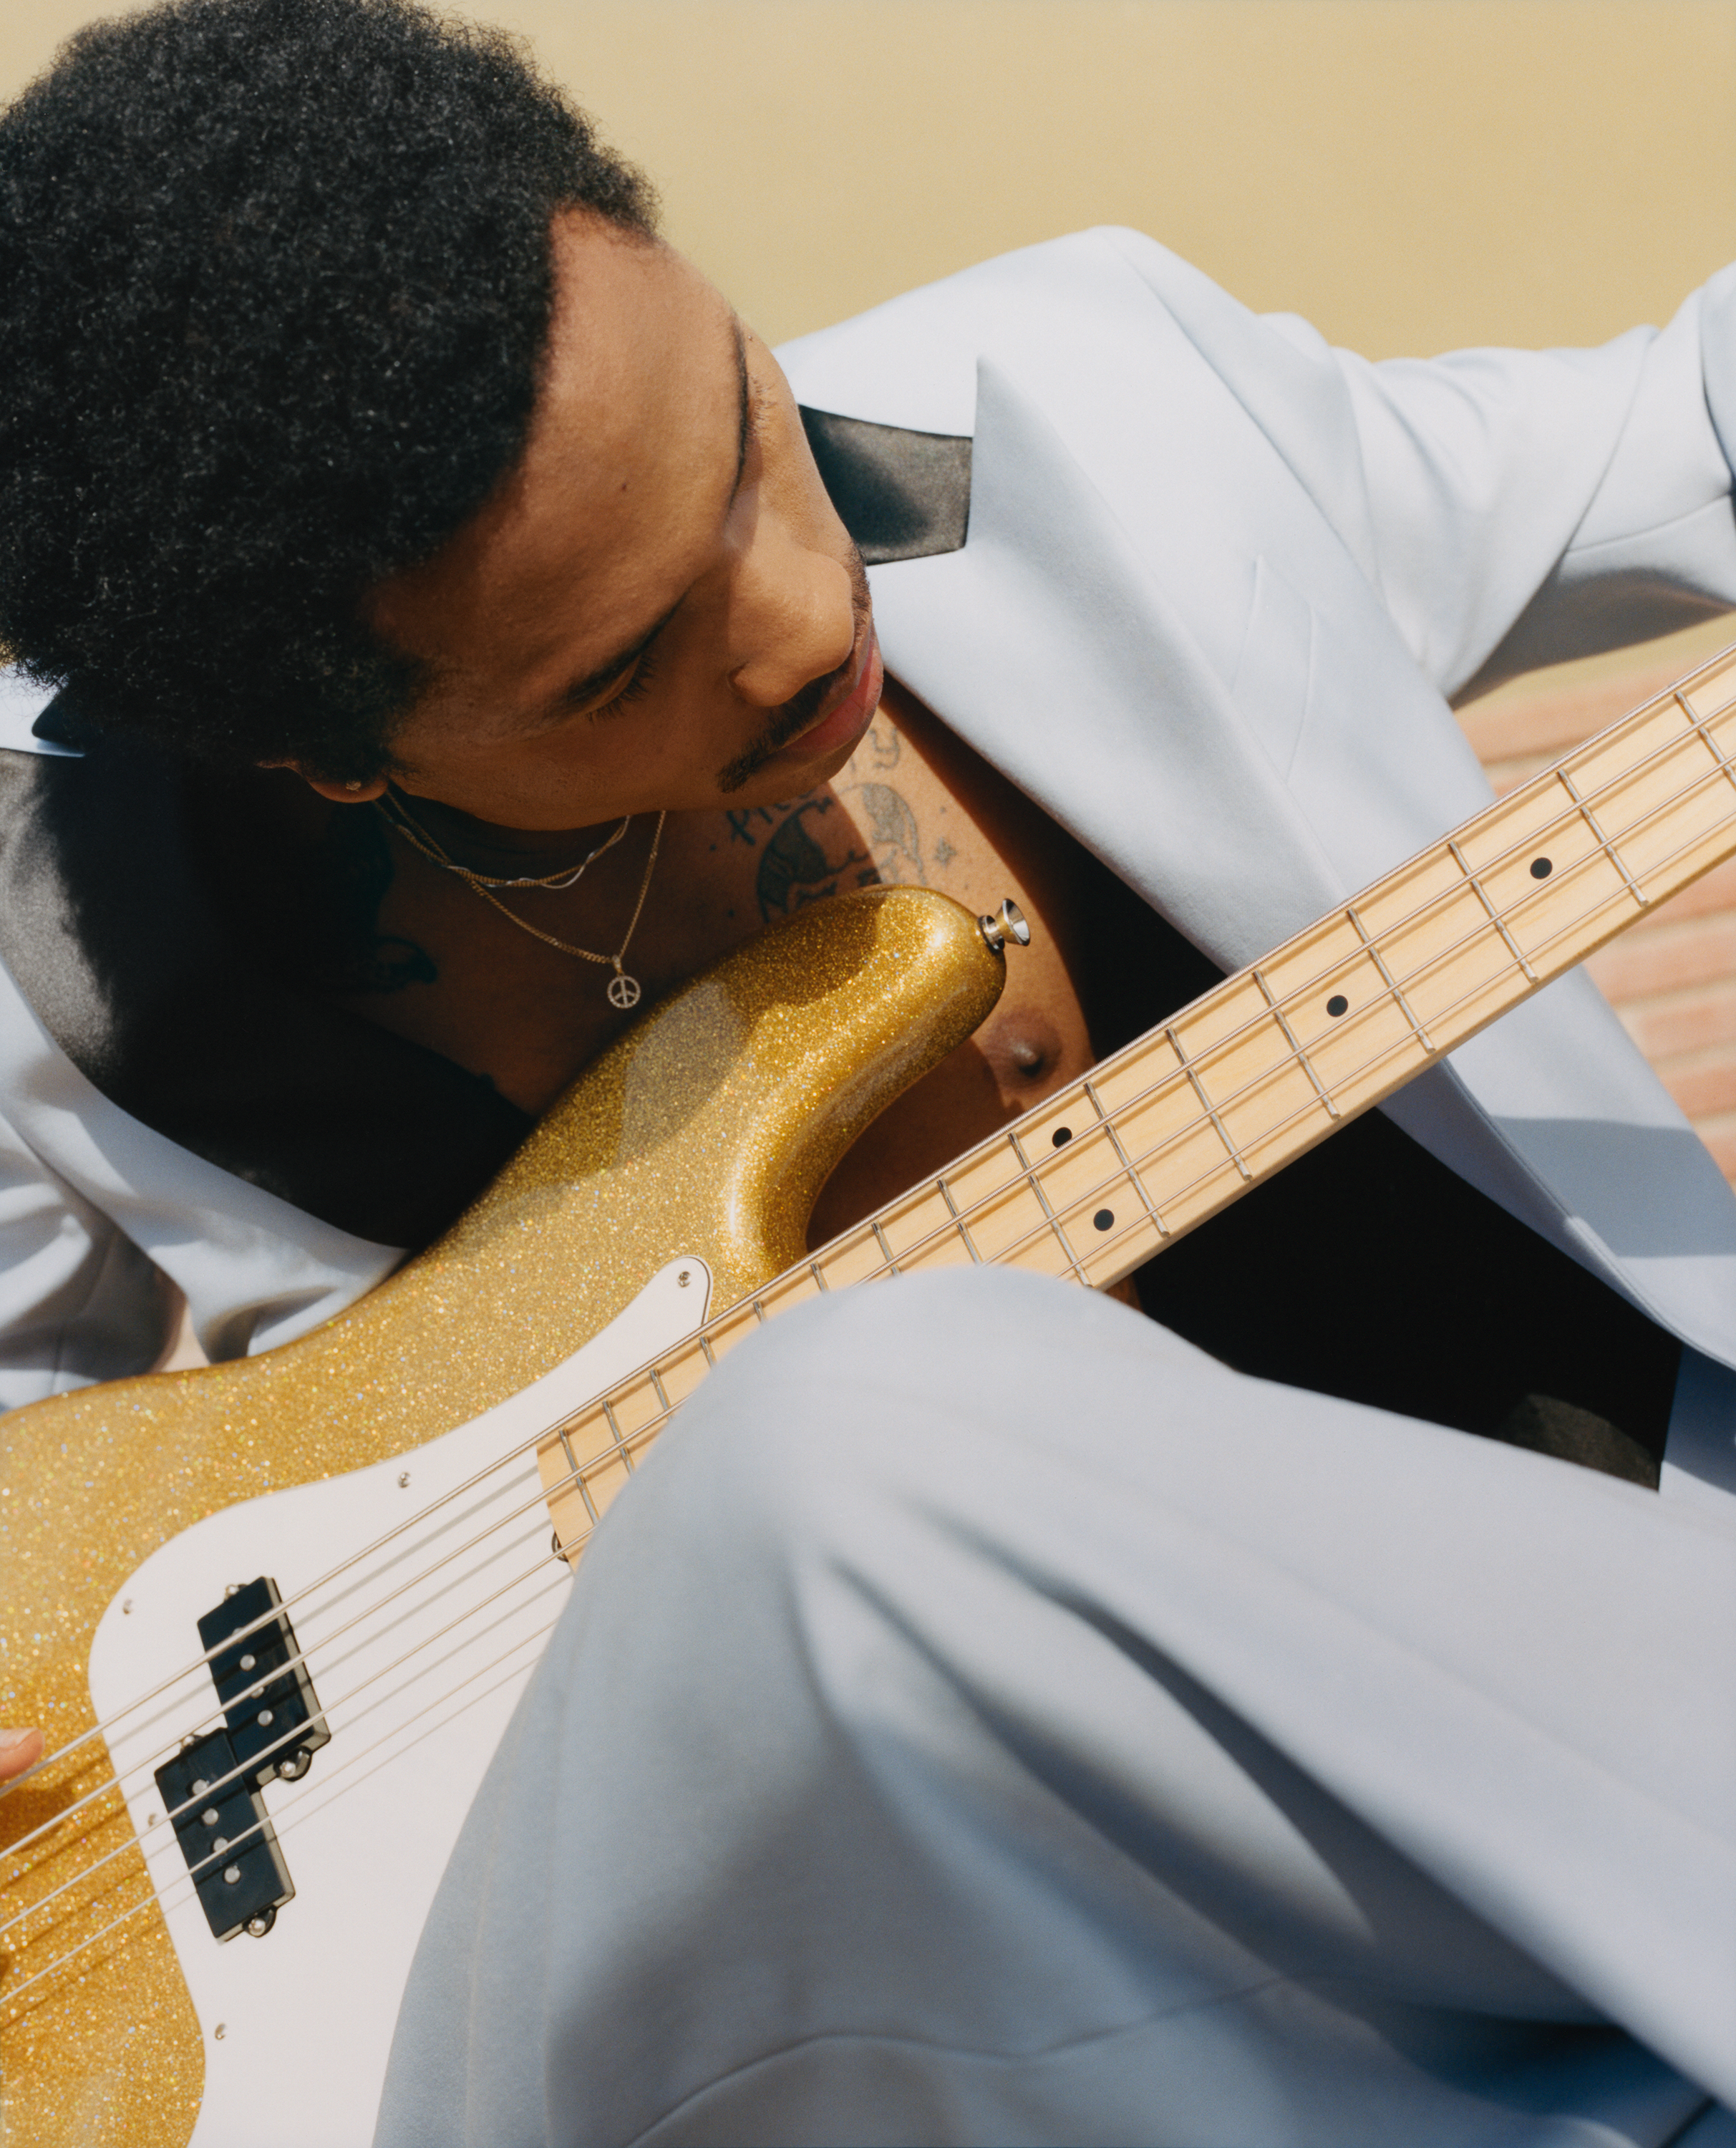 Steve Lacy Interview: A Calabasas Encounter at Erewhon